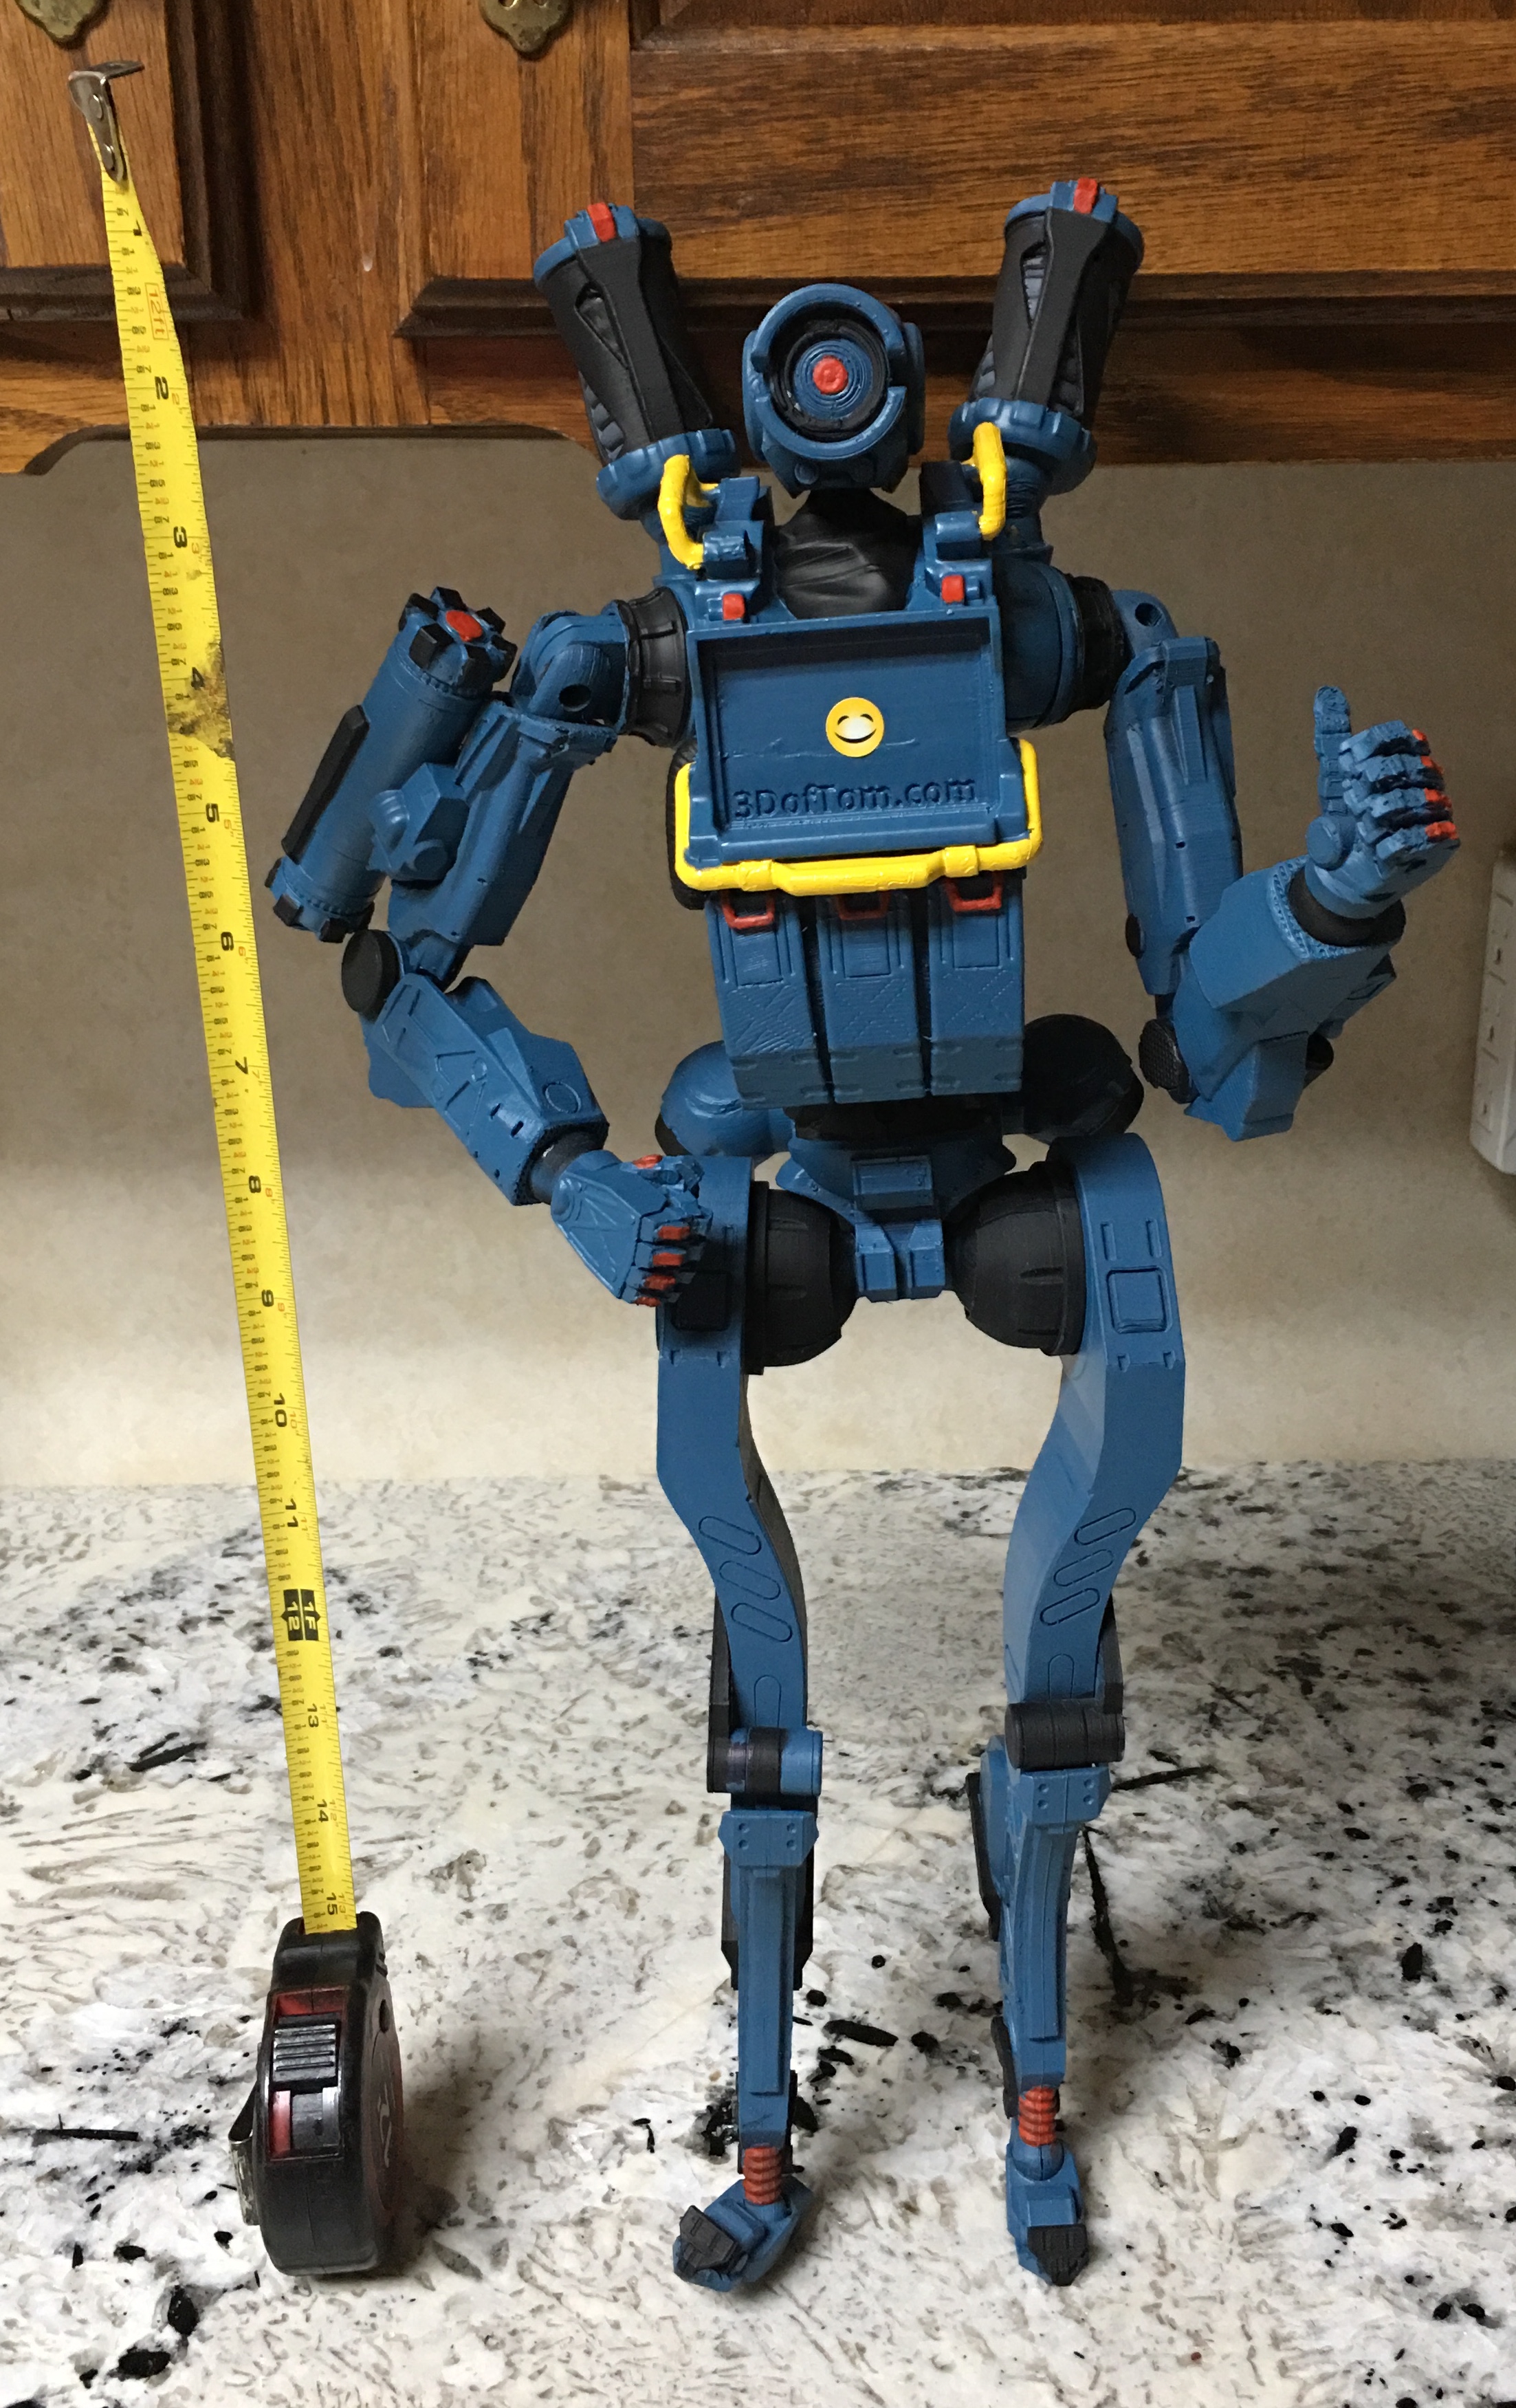 3d Printable Pathfinder From Apex Legends Articulated Action Figure By Tom Davis